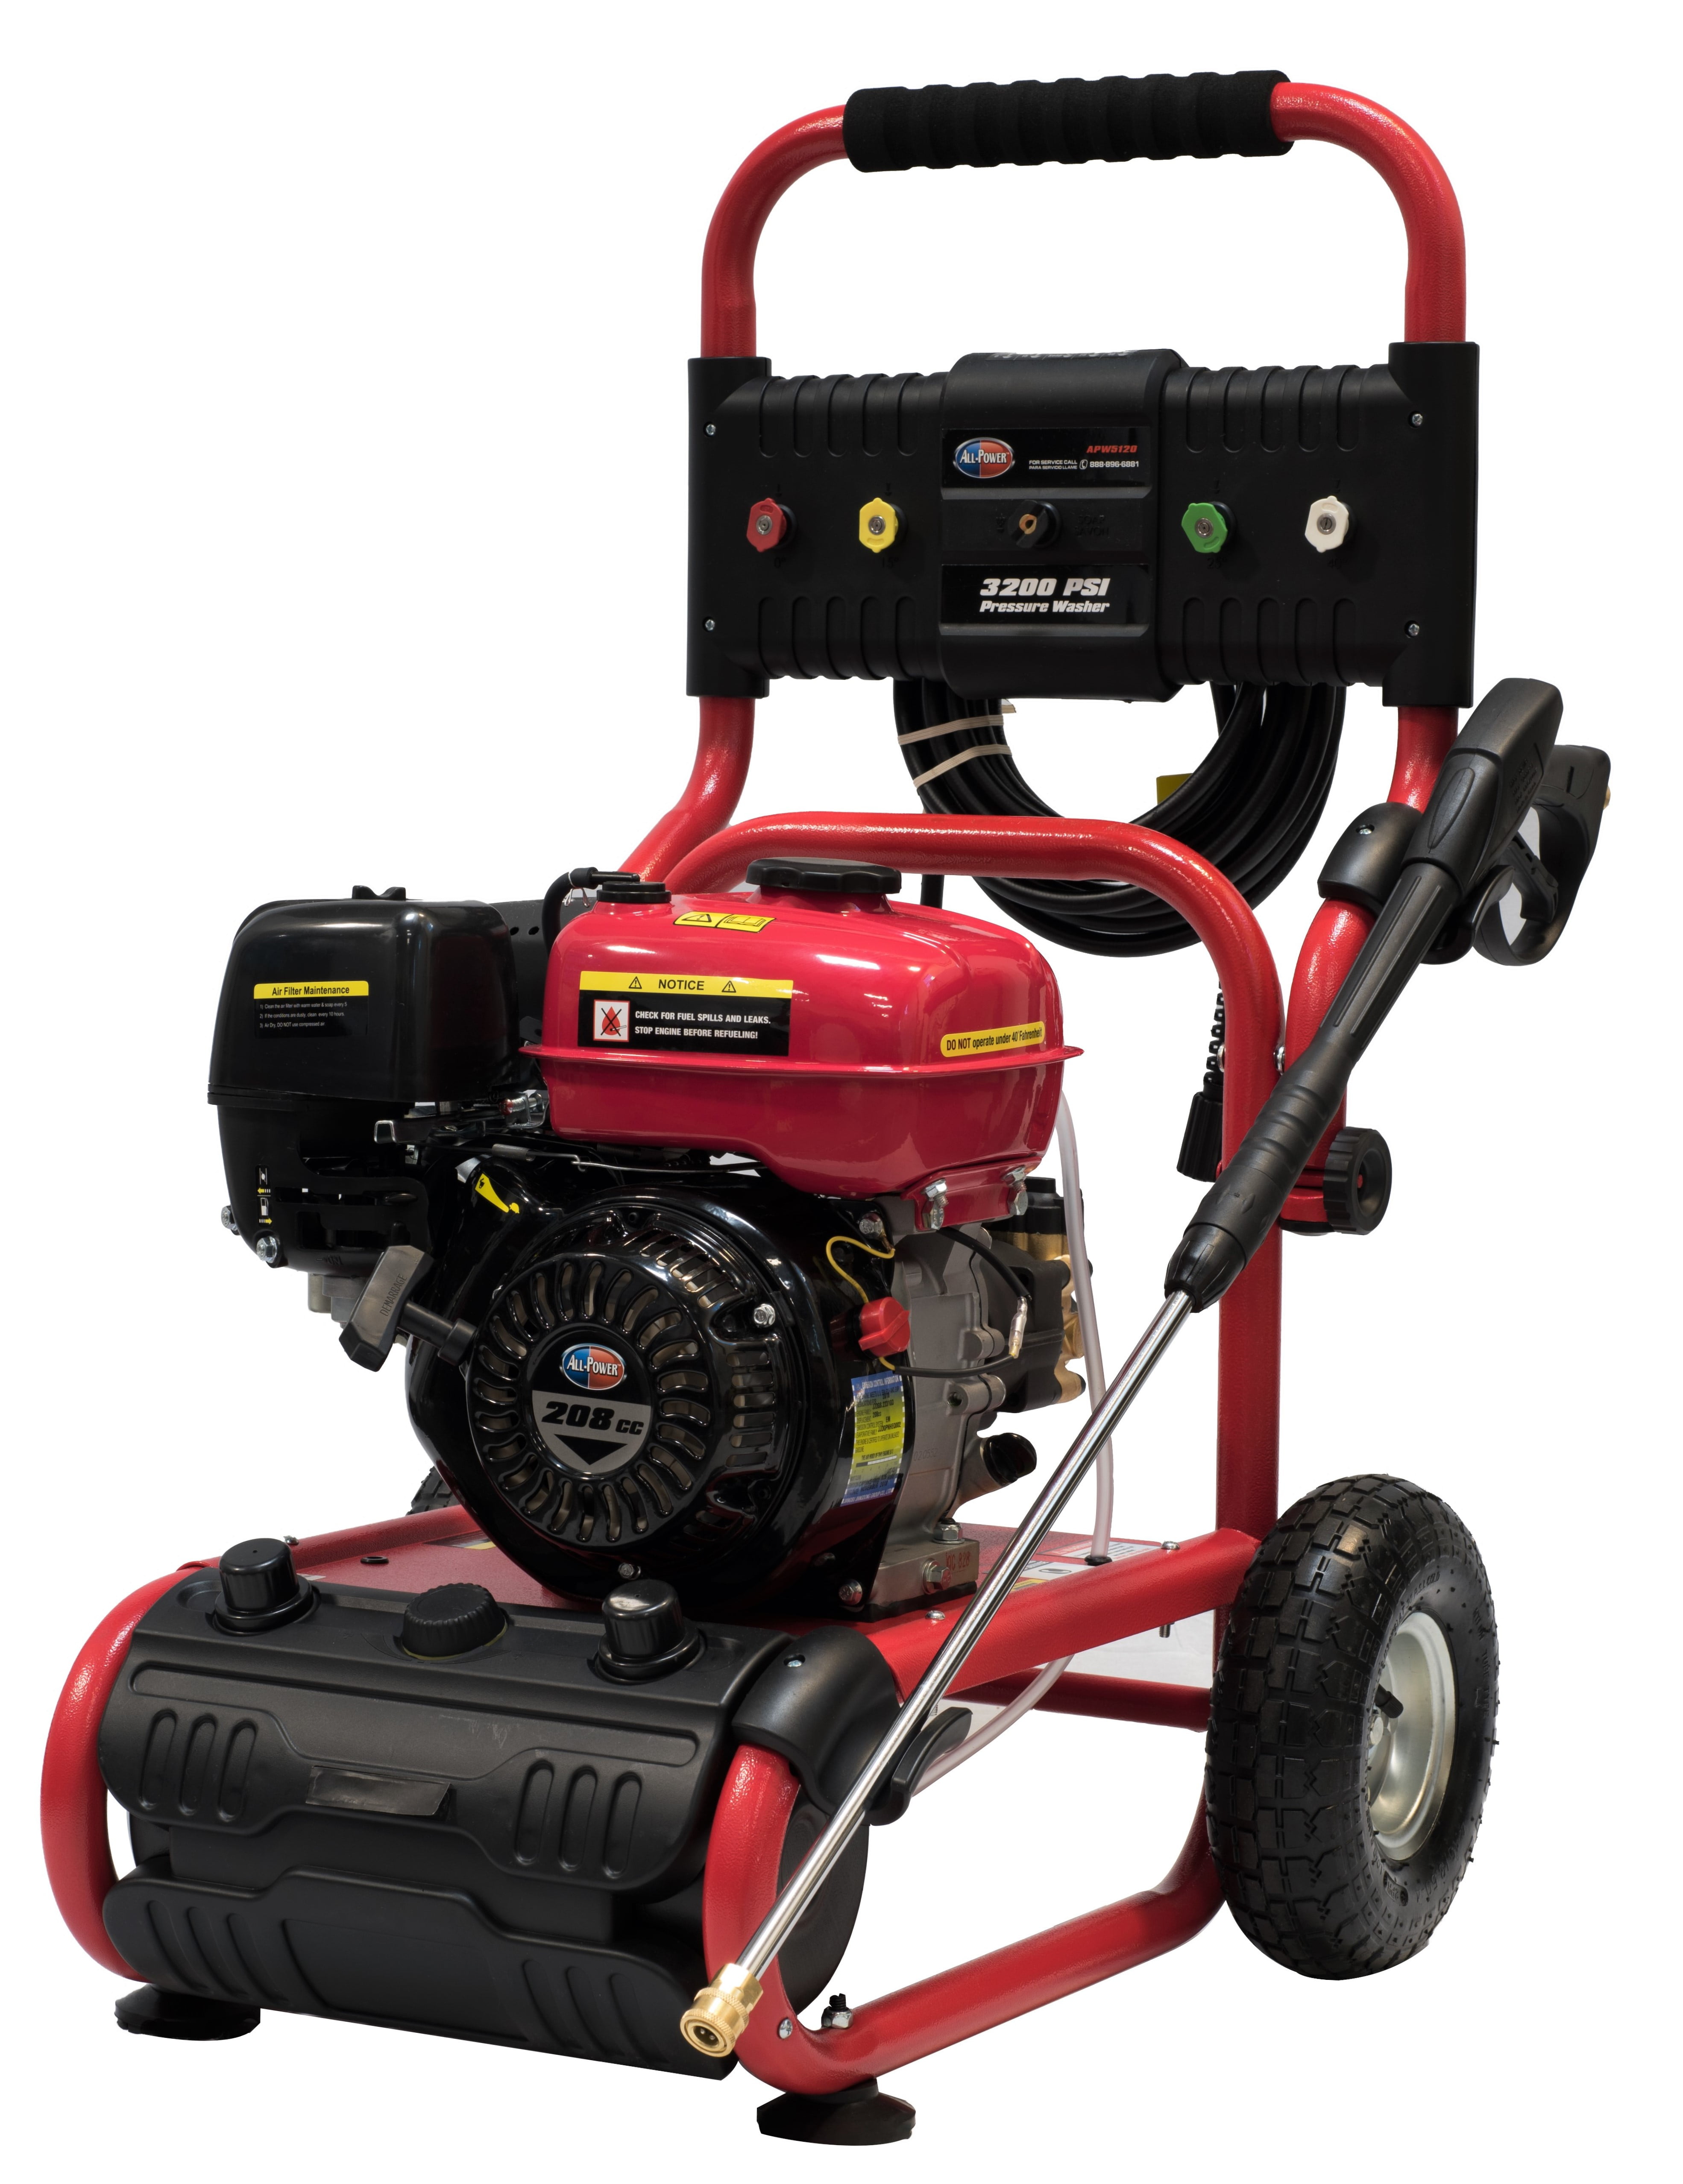 Gas or Diesel Powered Power Washers - ACME Cleaning Equipment